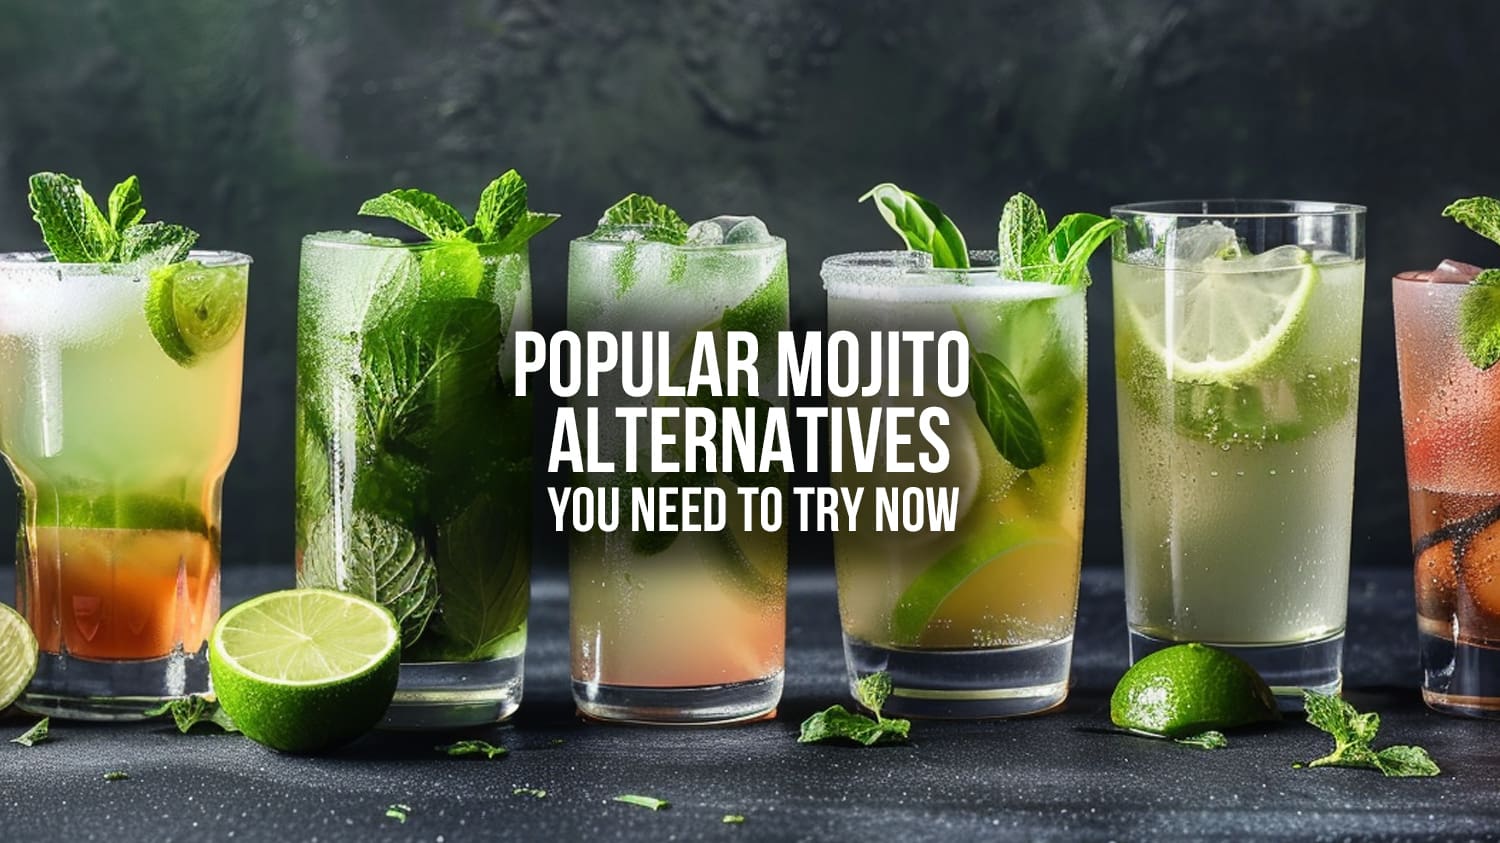 Popular Mojito Alternatives You Need to Try Now